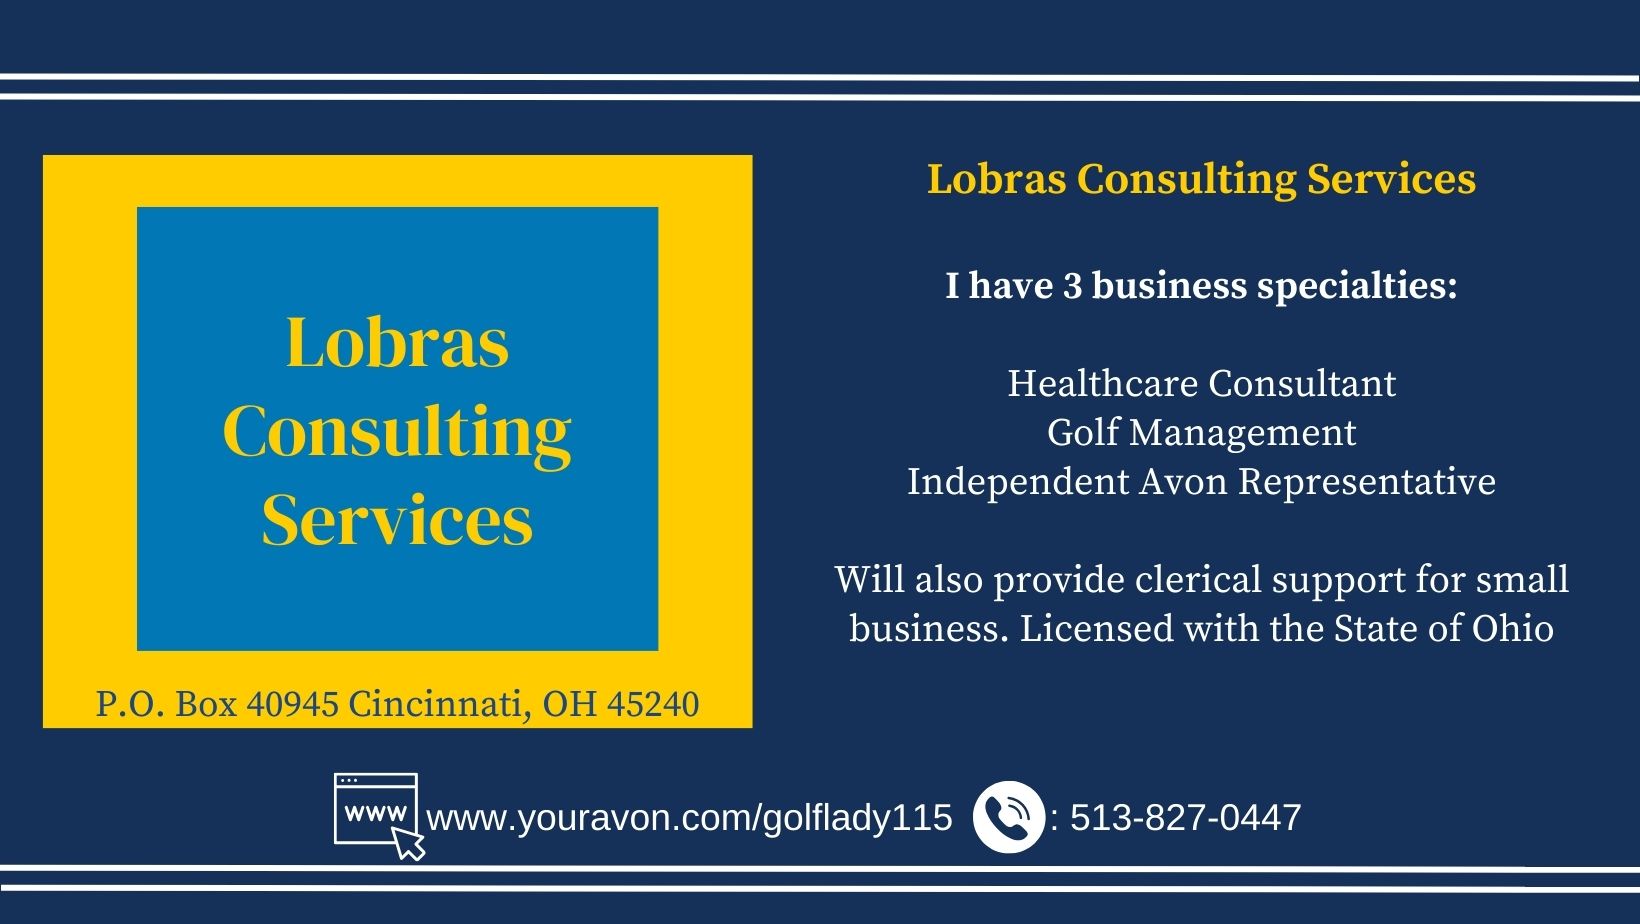 Lobras-Consulting-Services.jpg